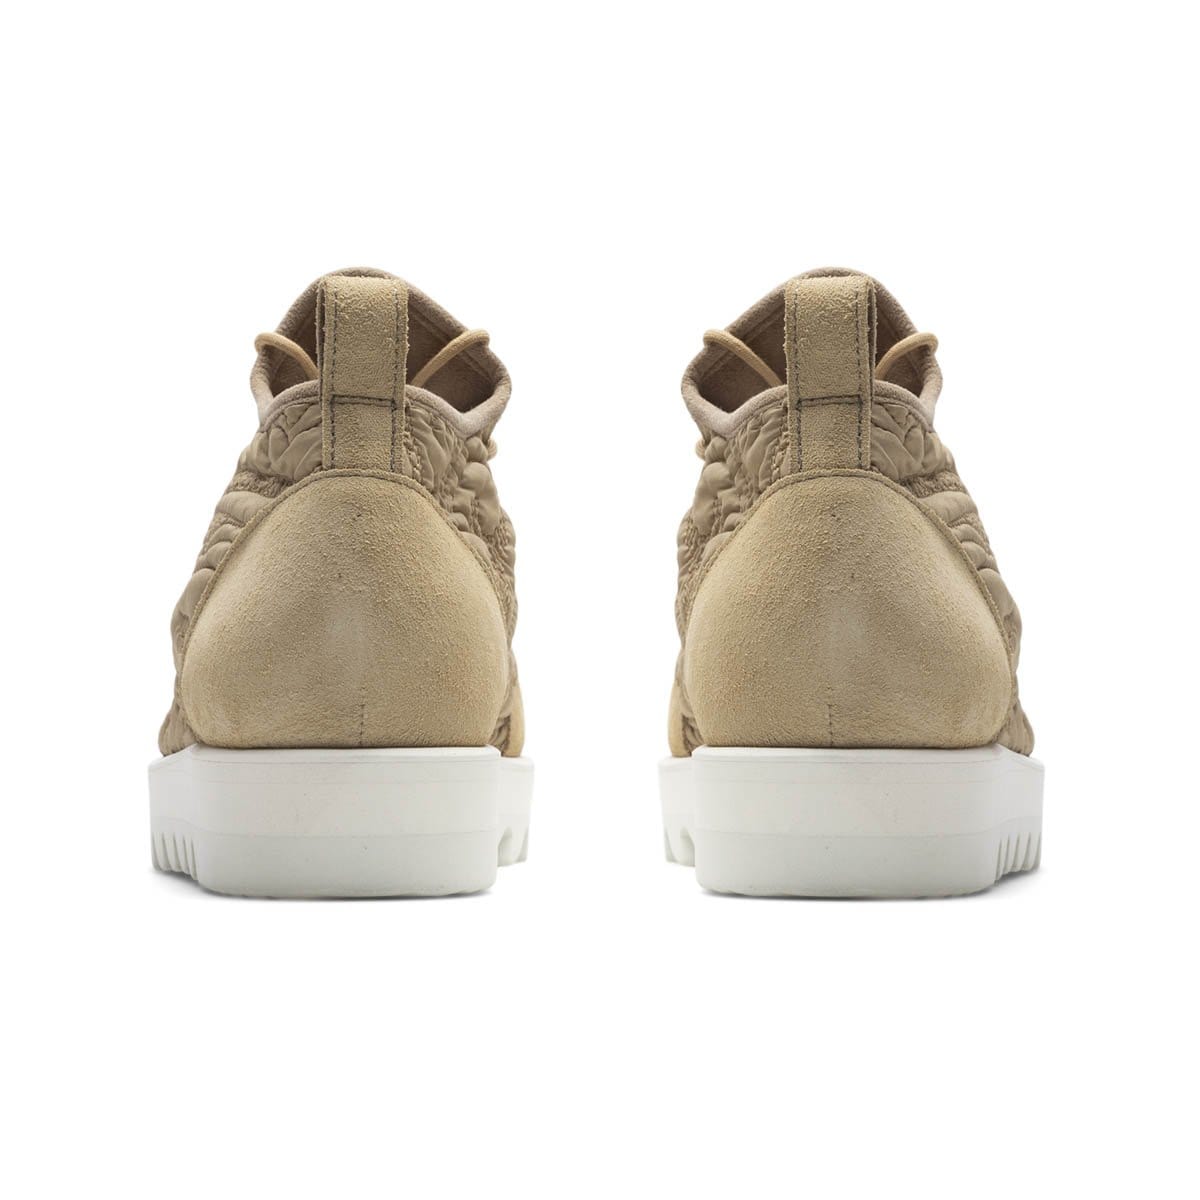 Hender Scheme tow-top Boots QUILTING LACE